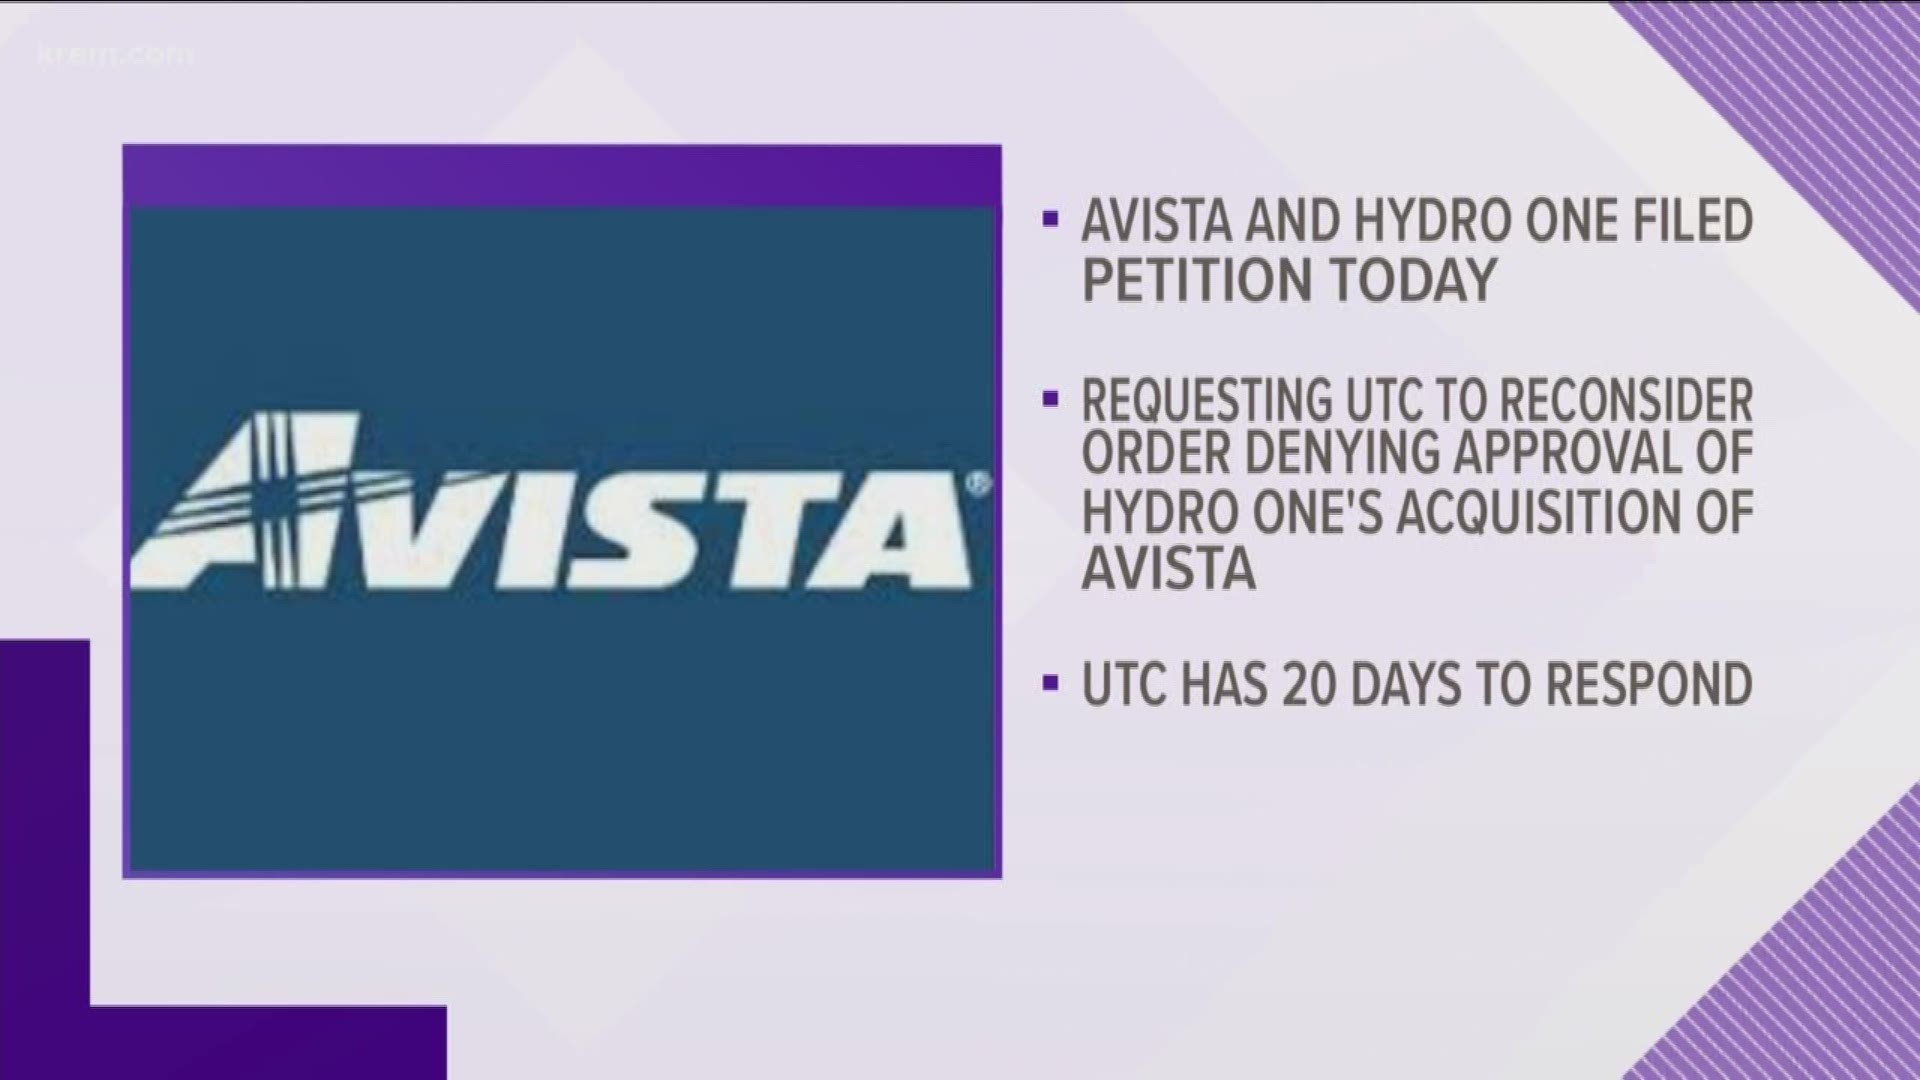 On Dec. 5, the UTC denied Hydro One’s acquisition of Avista. State regulators said the merger did not adequately protect Avista or its customers from political and financial risks.